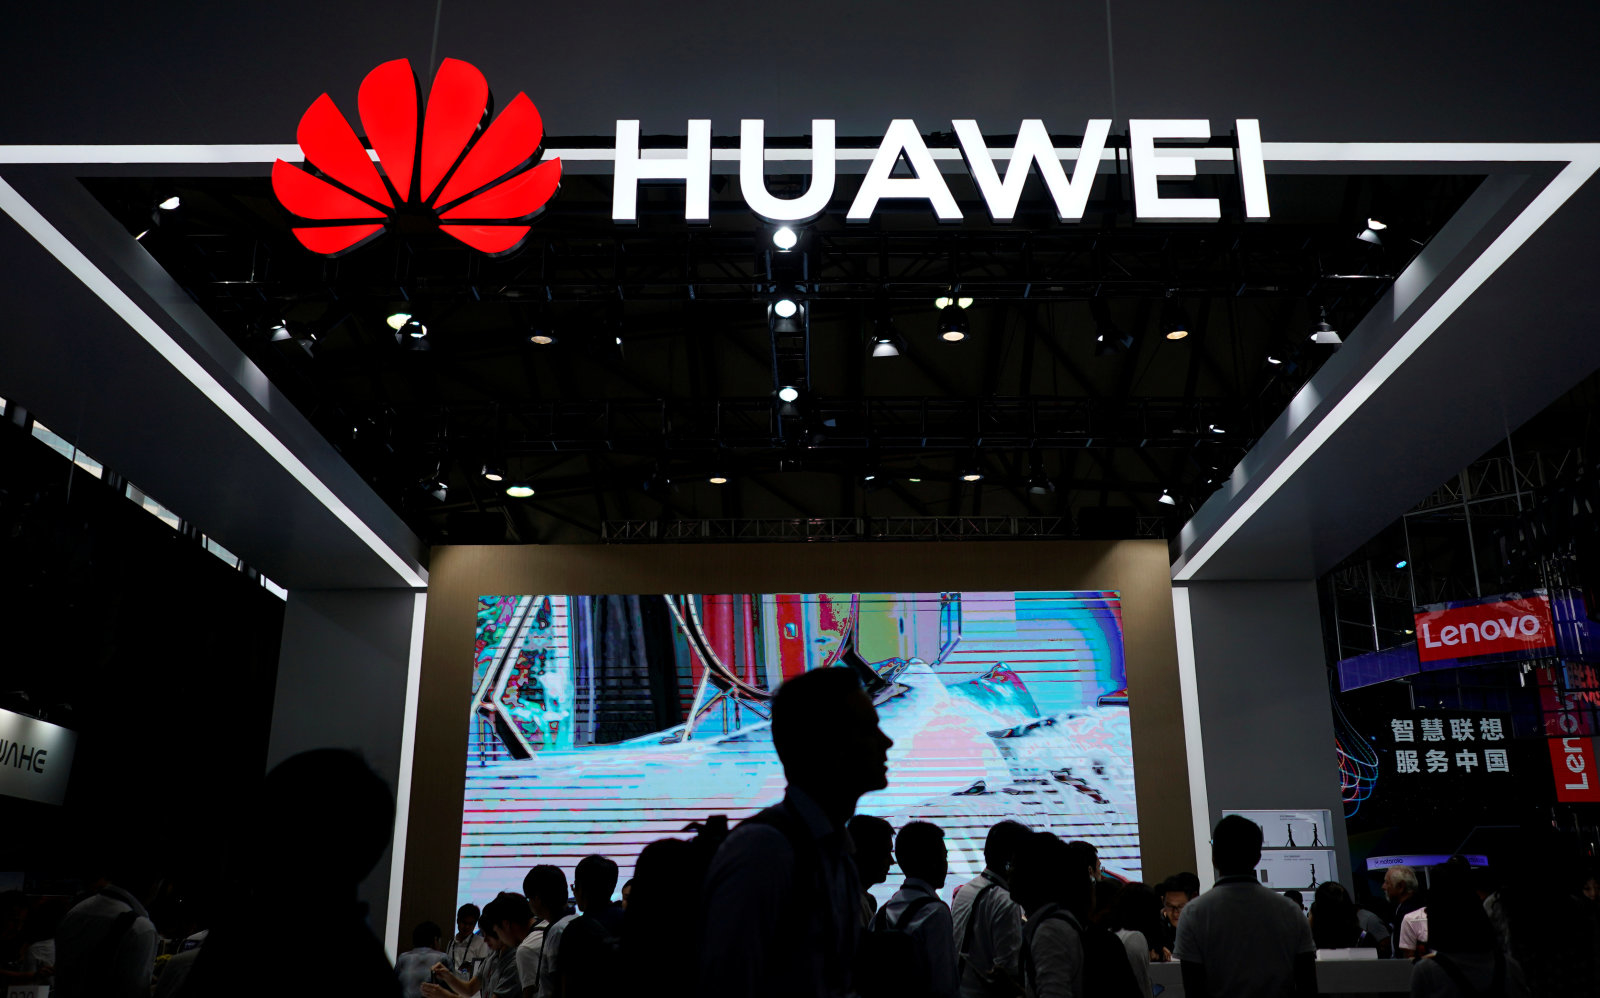 People walk past a sign board of Huawei at CES (Consumer Electronics Show) Asia 2018 in Shanghai, China June 14, 2018. REUTERS/Aly Song